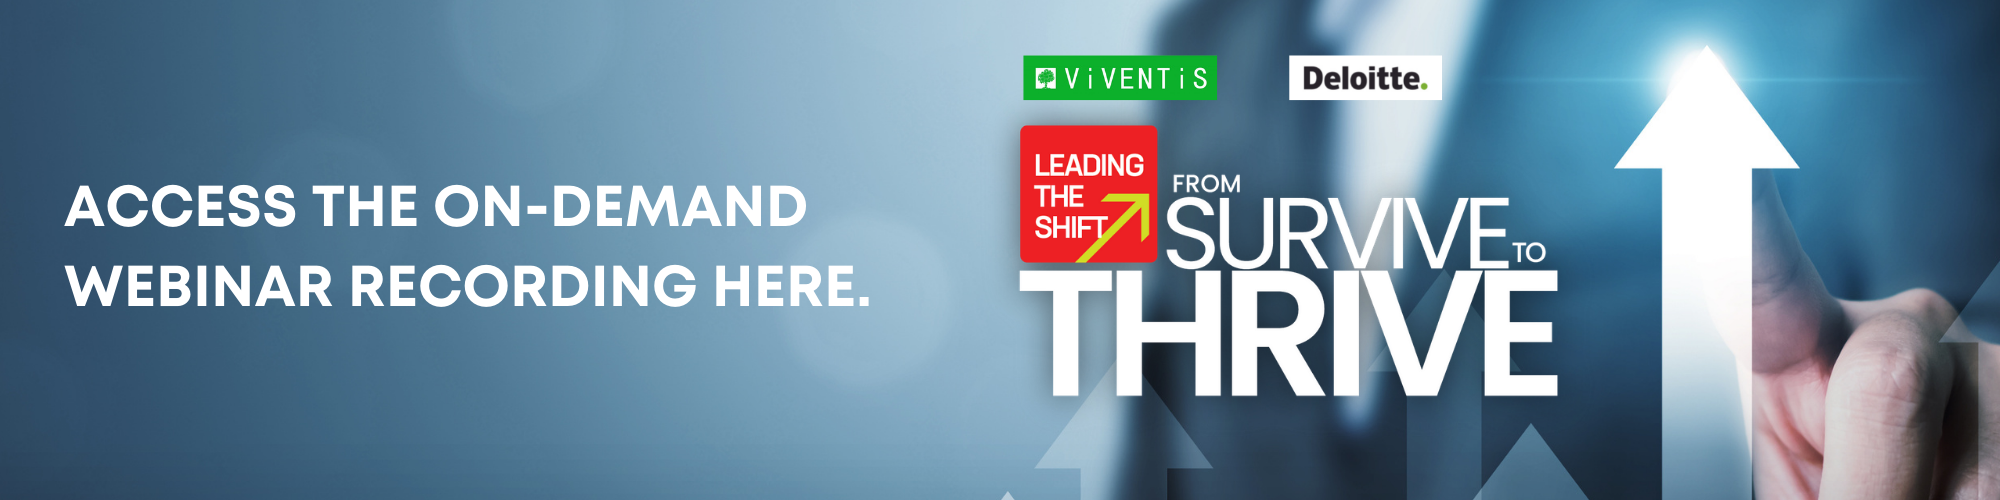 https://offers.viventis-search.com/leading-the-shift-series